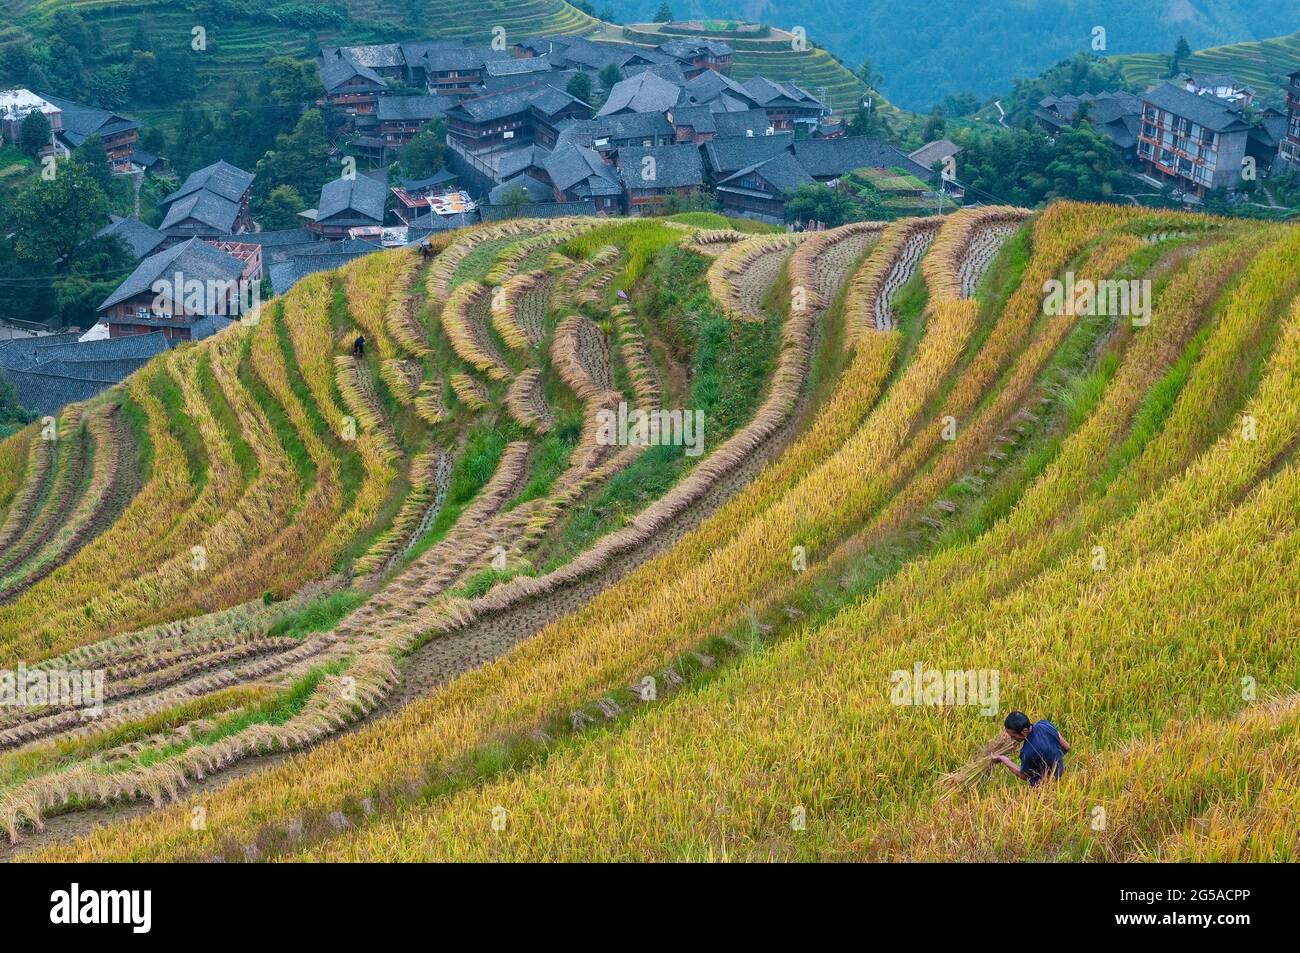 Chinese man of Zhuang indigenous hill tribe cutting rice plants in rice harvest in Longsheng Ping An village rice terraces, Guangxi province, China. Stock Photo